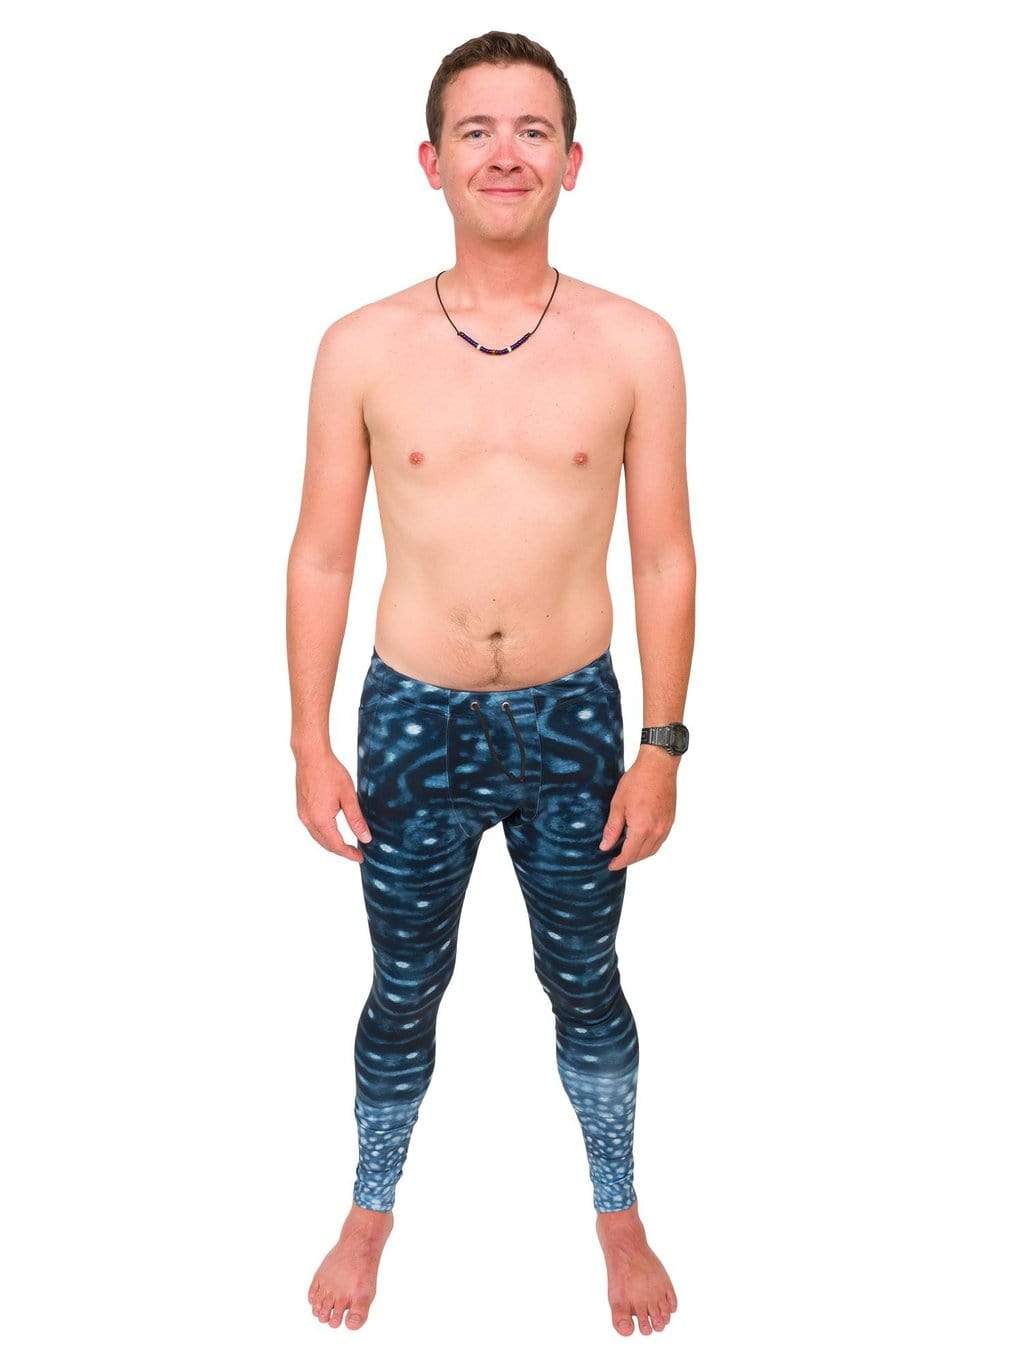 Model: Joe is a coral restoration ecologist and an avid runner.He is 5&#39;10&quot;, 145lbs and wearing a size S.